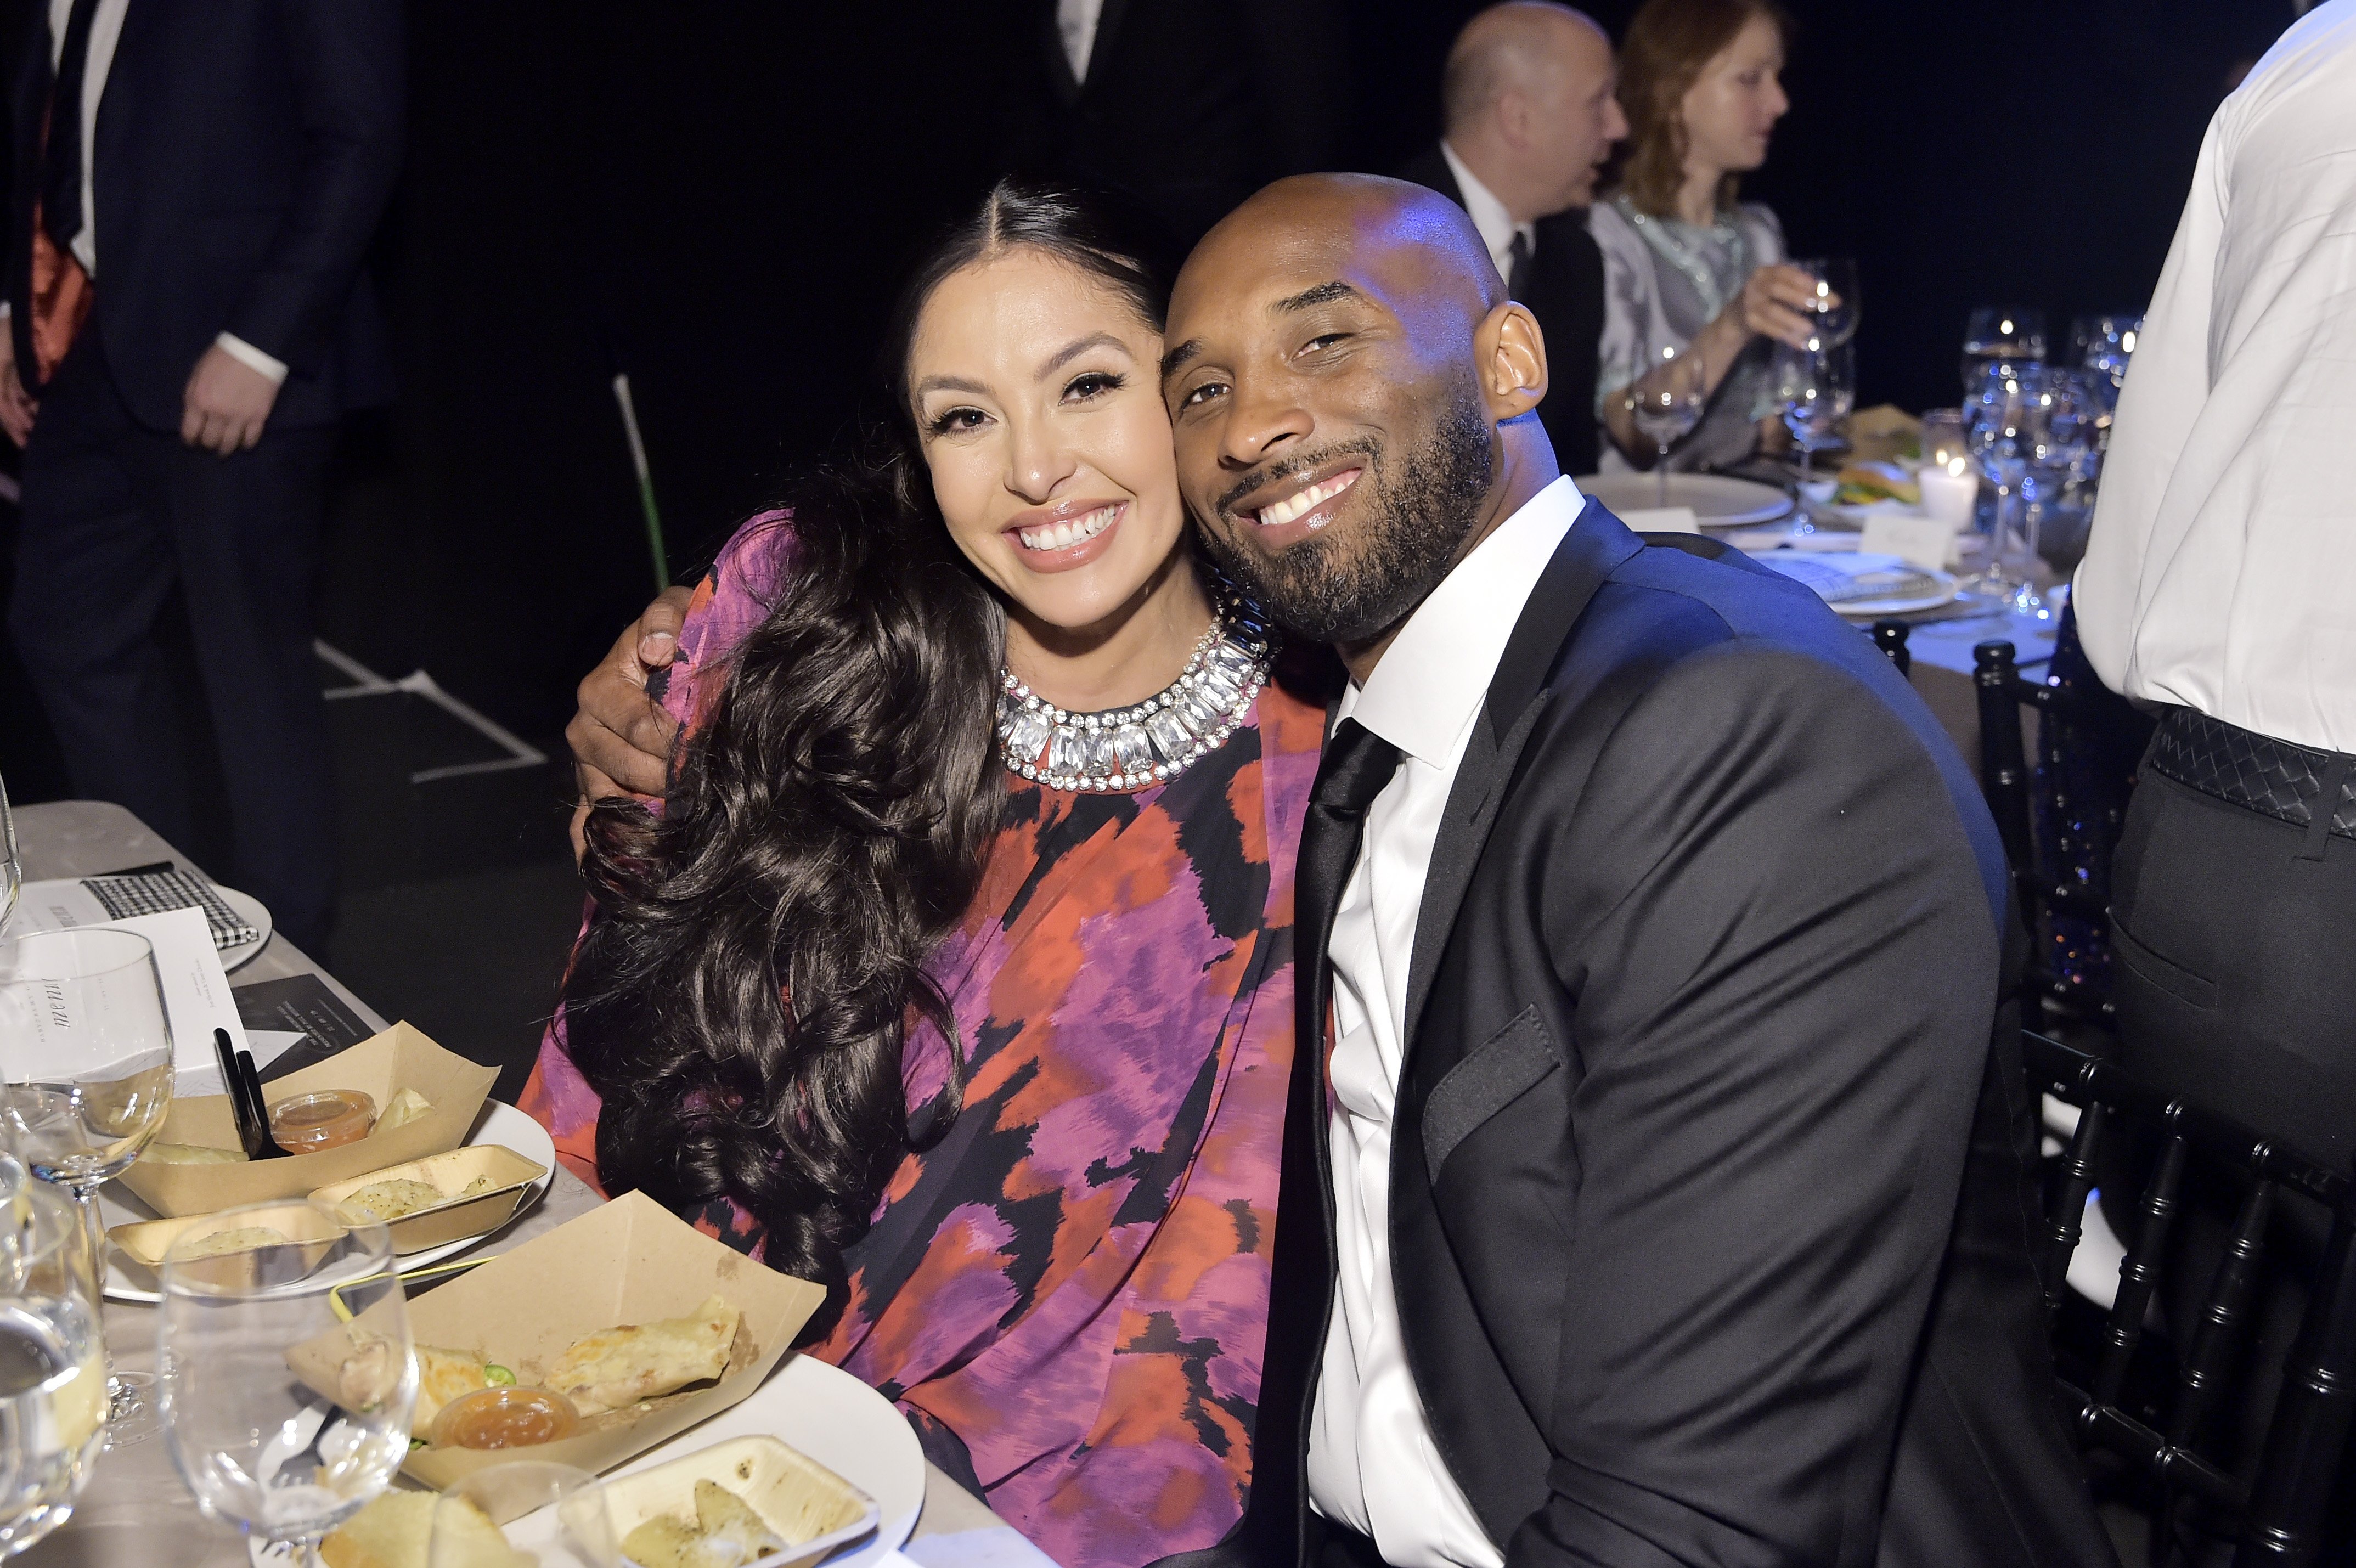 Vanessa Laine Bryant and Kobe Bryant attend the 2019 Baby2Baby Gala on November 09, 2019 | Photo: GettyImages